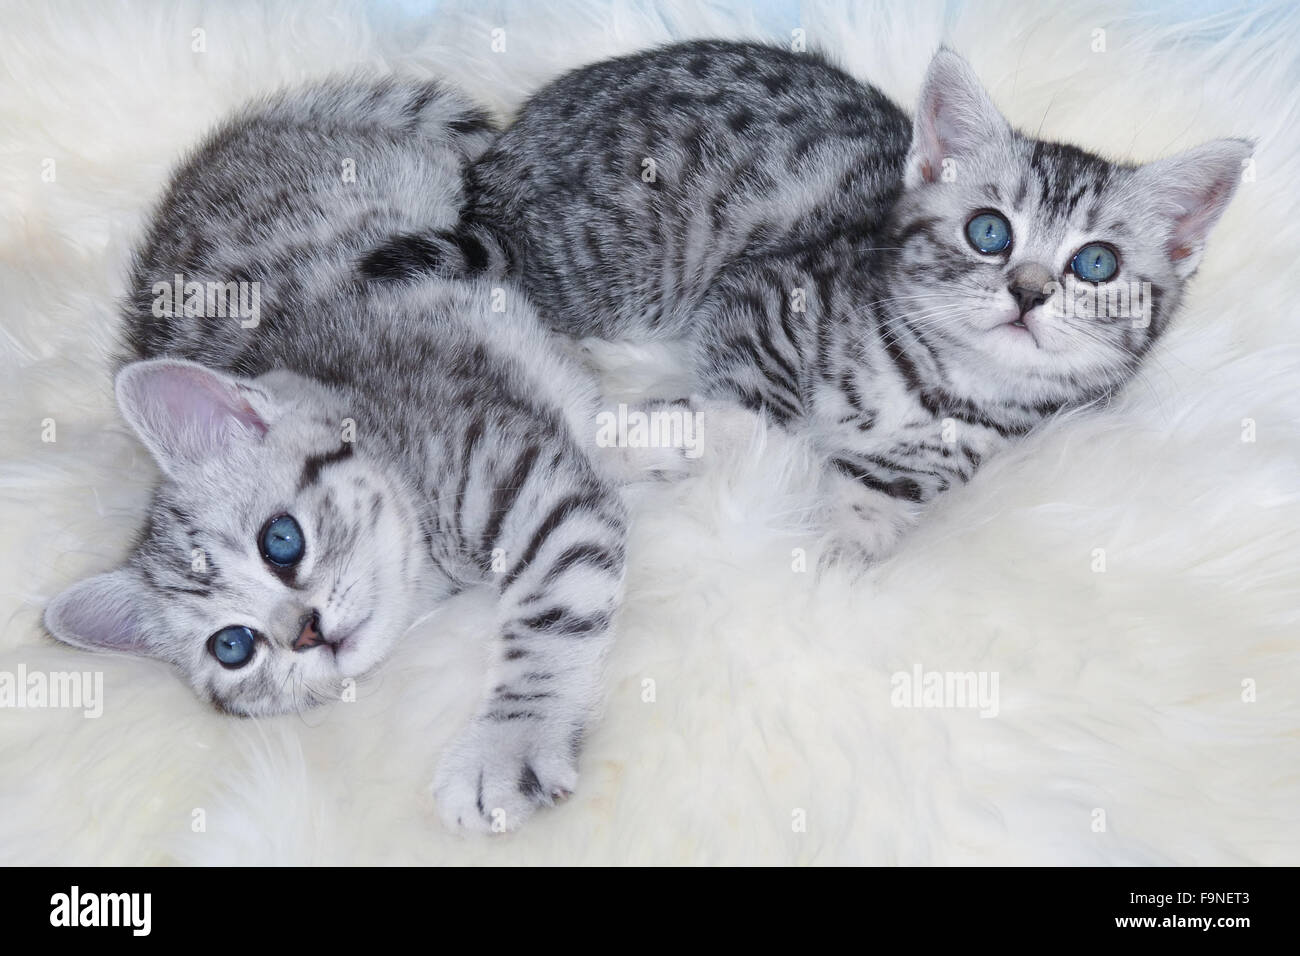 Two Young Black Silver Tabby Cats Lying Lazy Together On Sheepskin